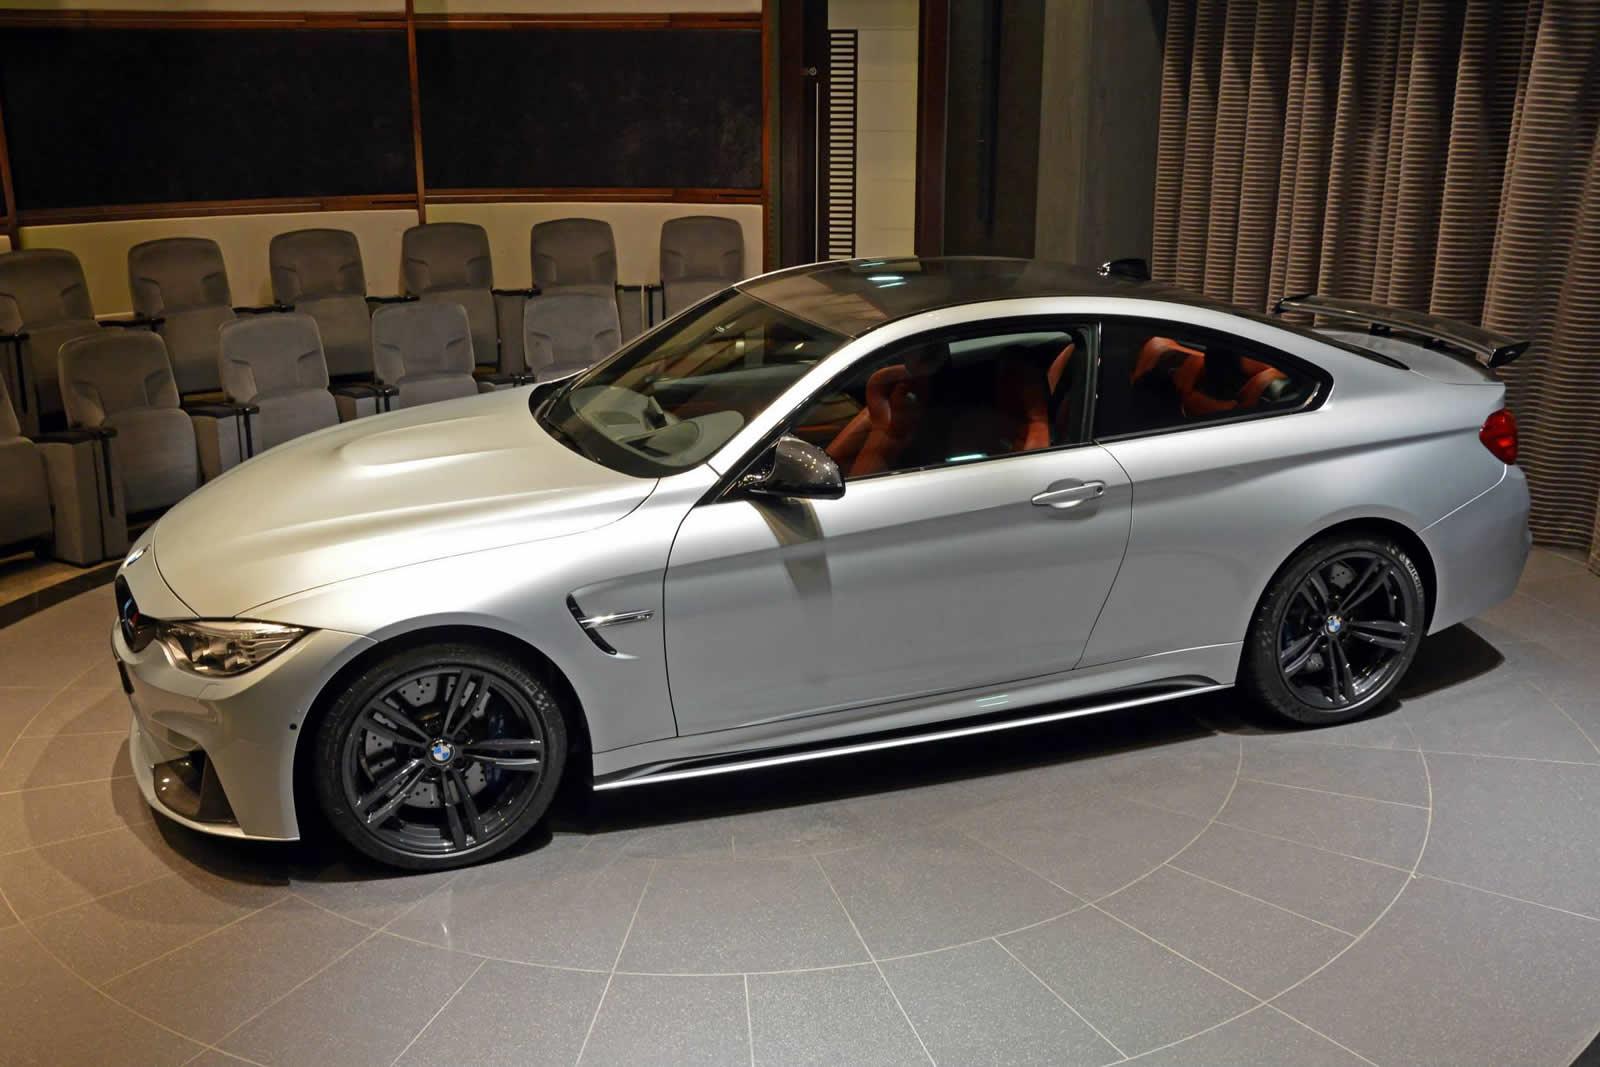 New BMW M4 Coupe Pops-Up at BMW Abu Dhabi